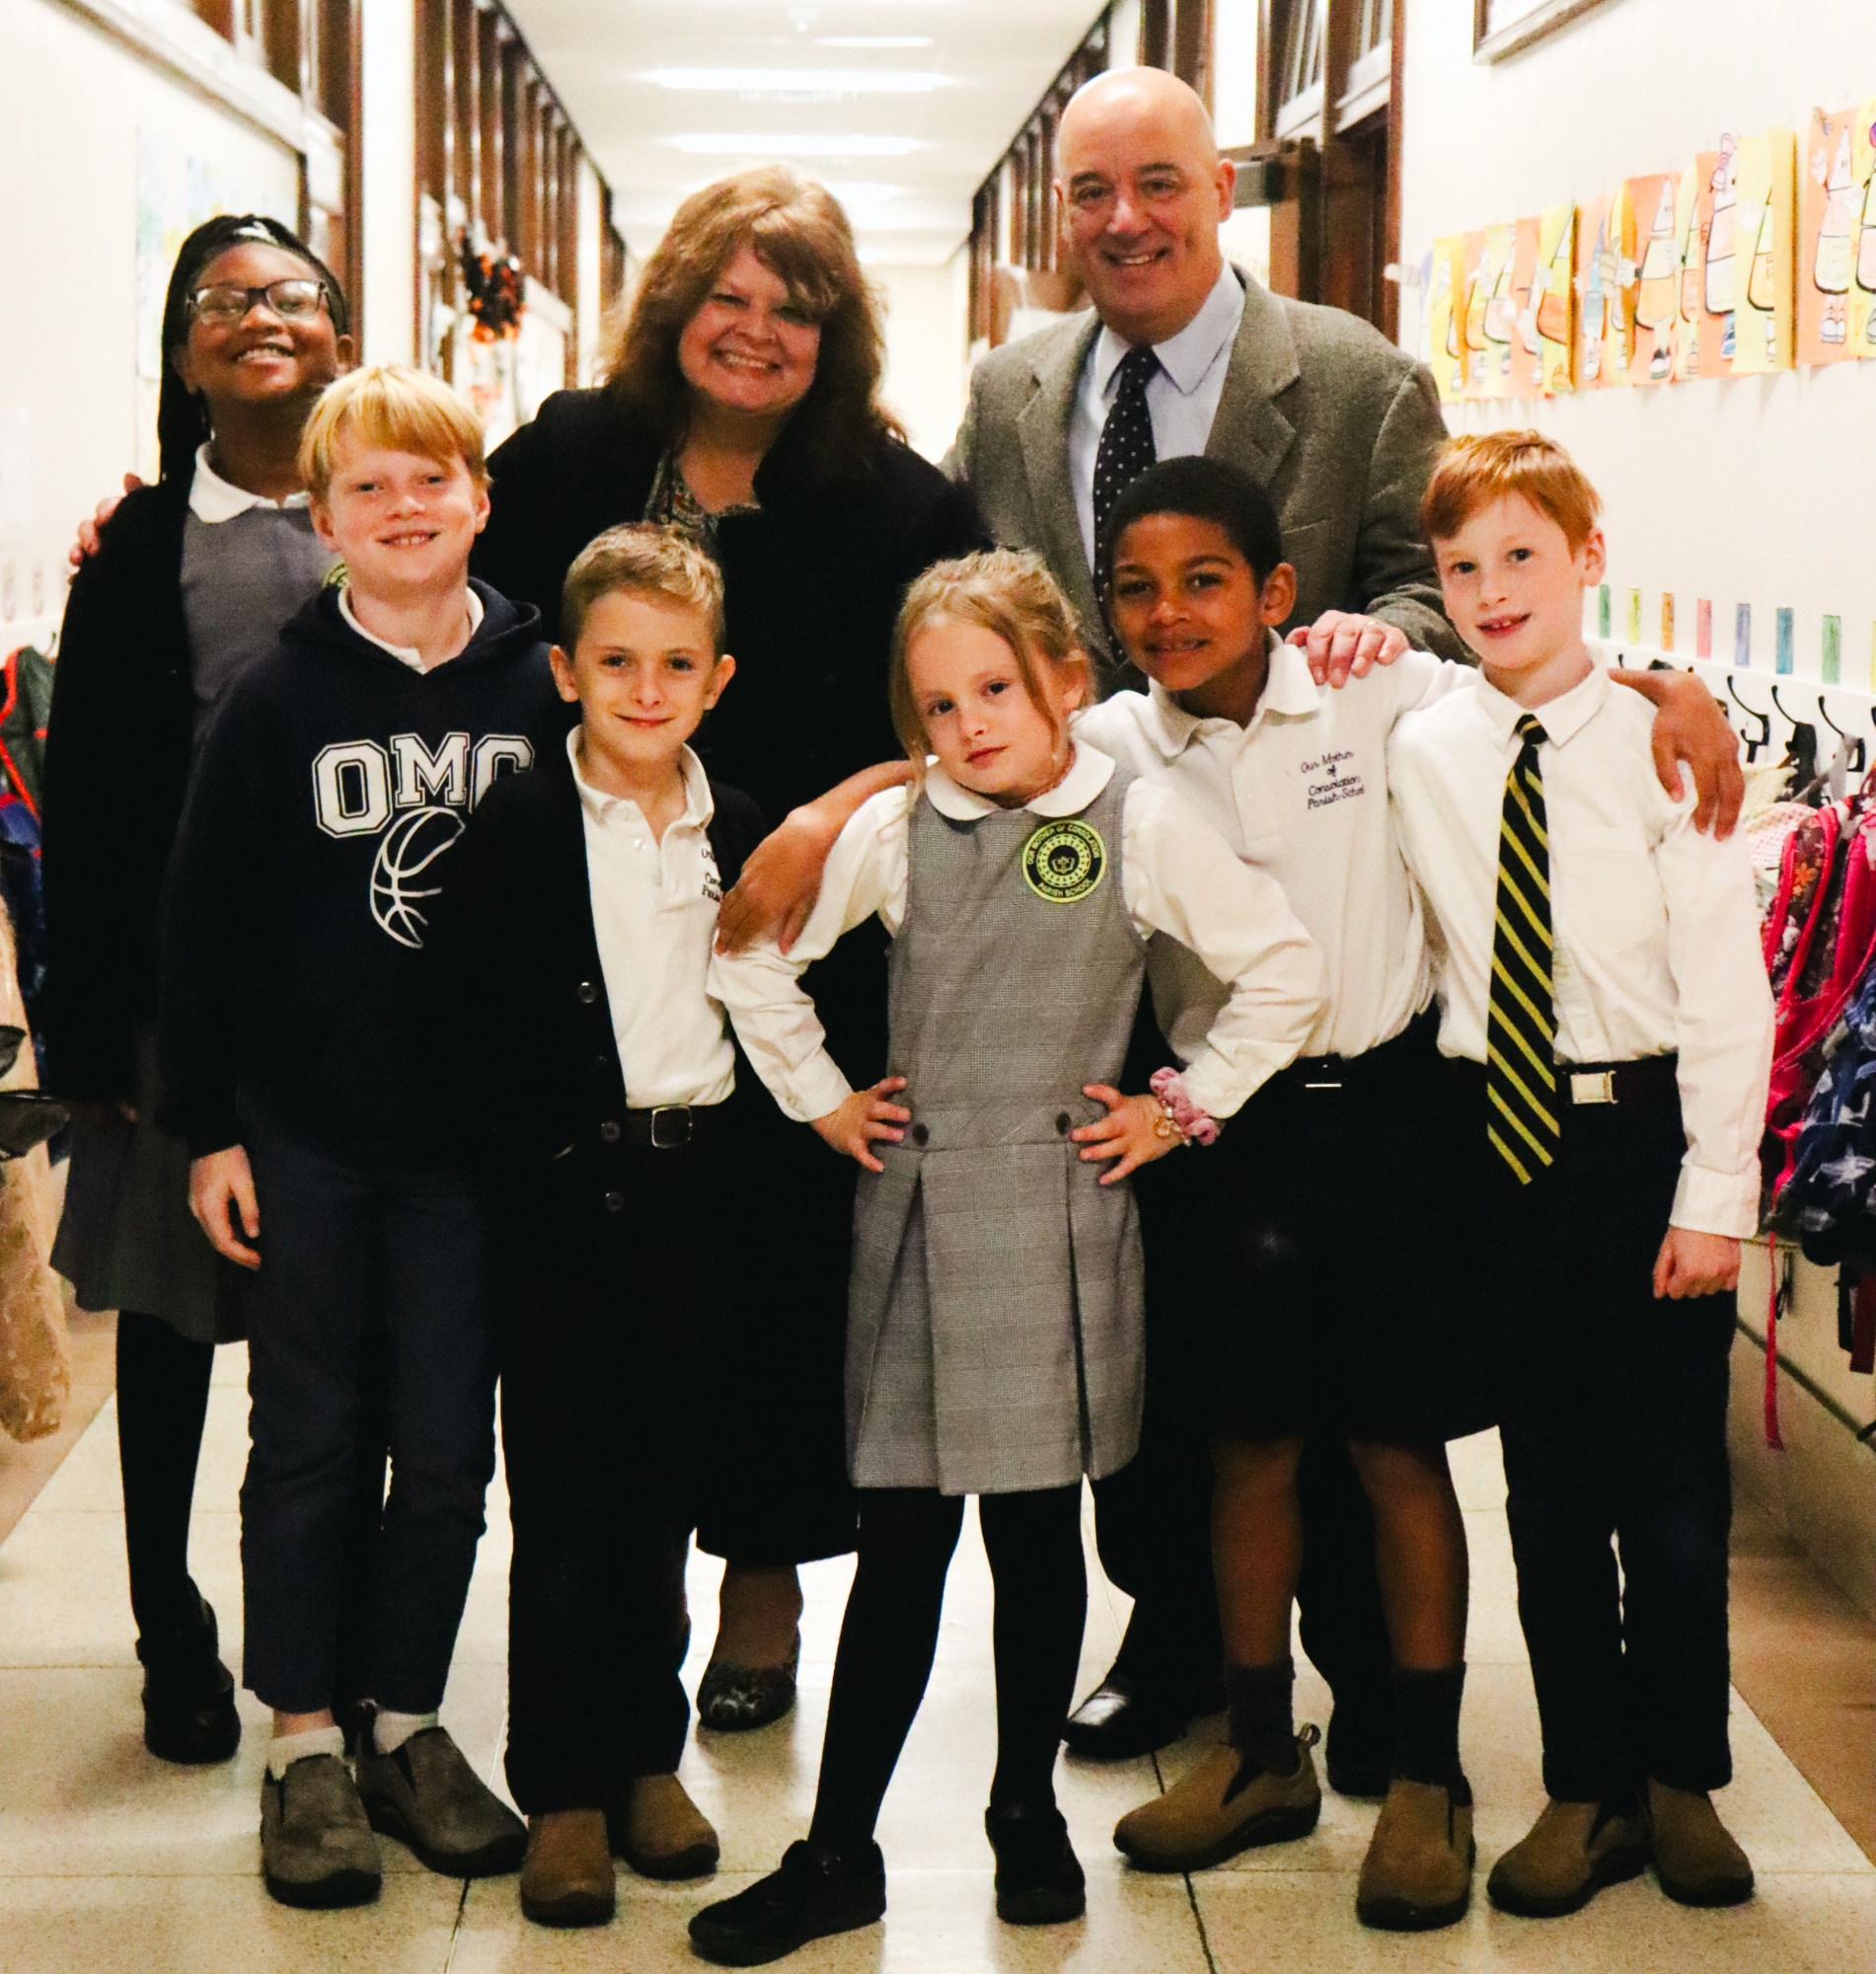 OMC Principal Patricia Sheetz, Ed.D., and CHC President William W. Latimer, Ph.D., M.P.H., were all smiles as they met with OMC students in support of the new grant collaborations.